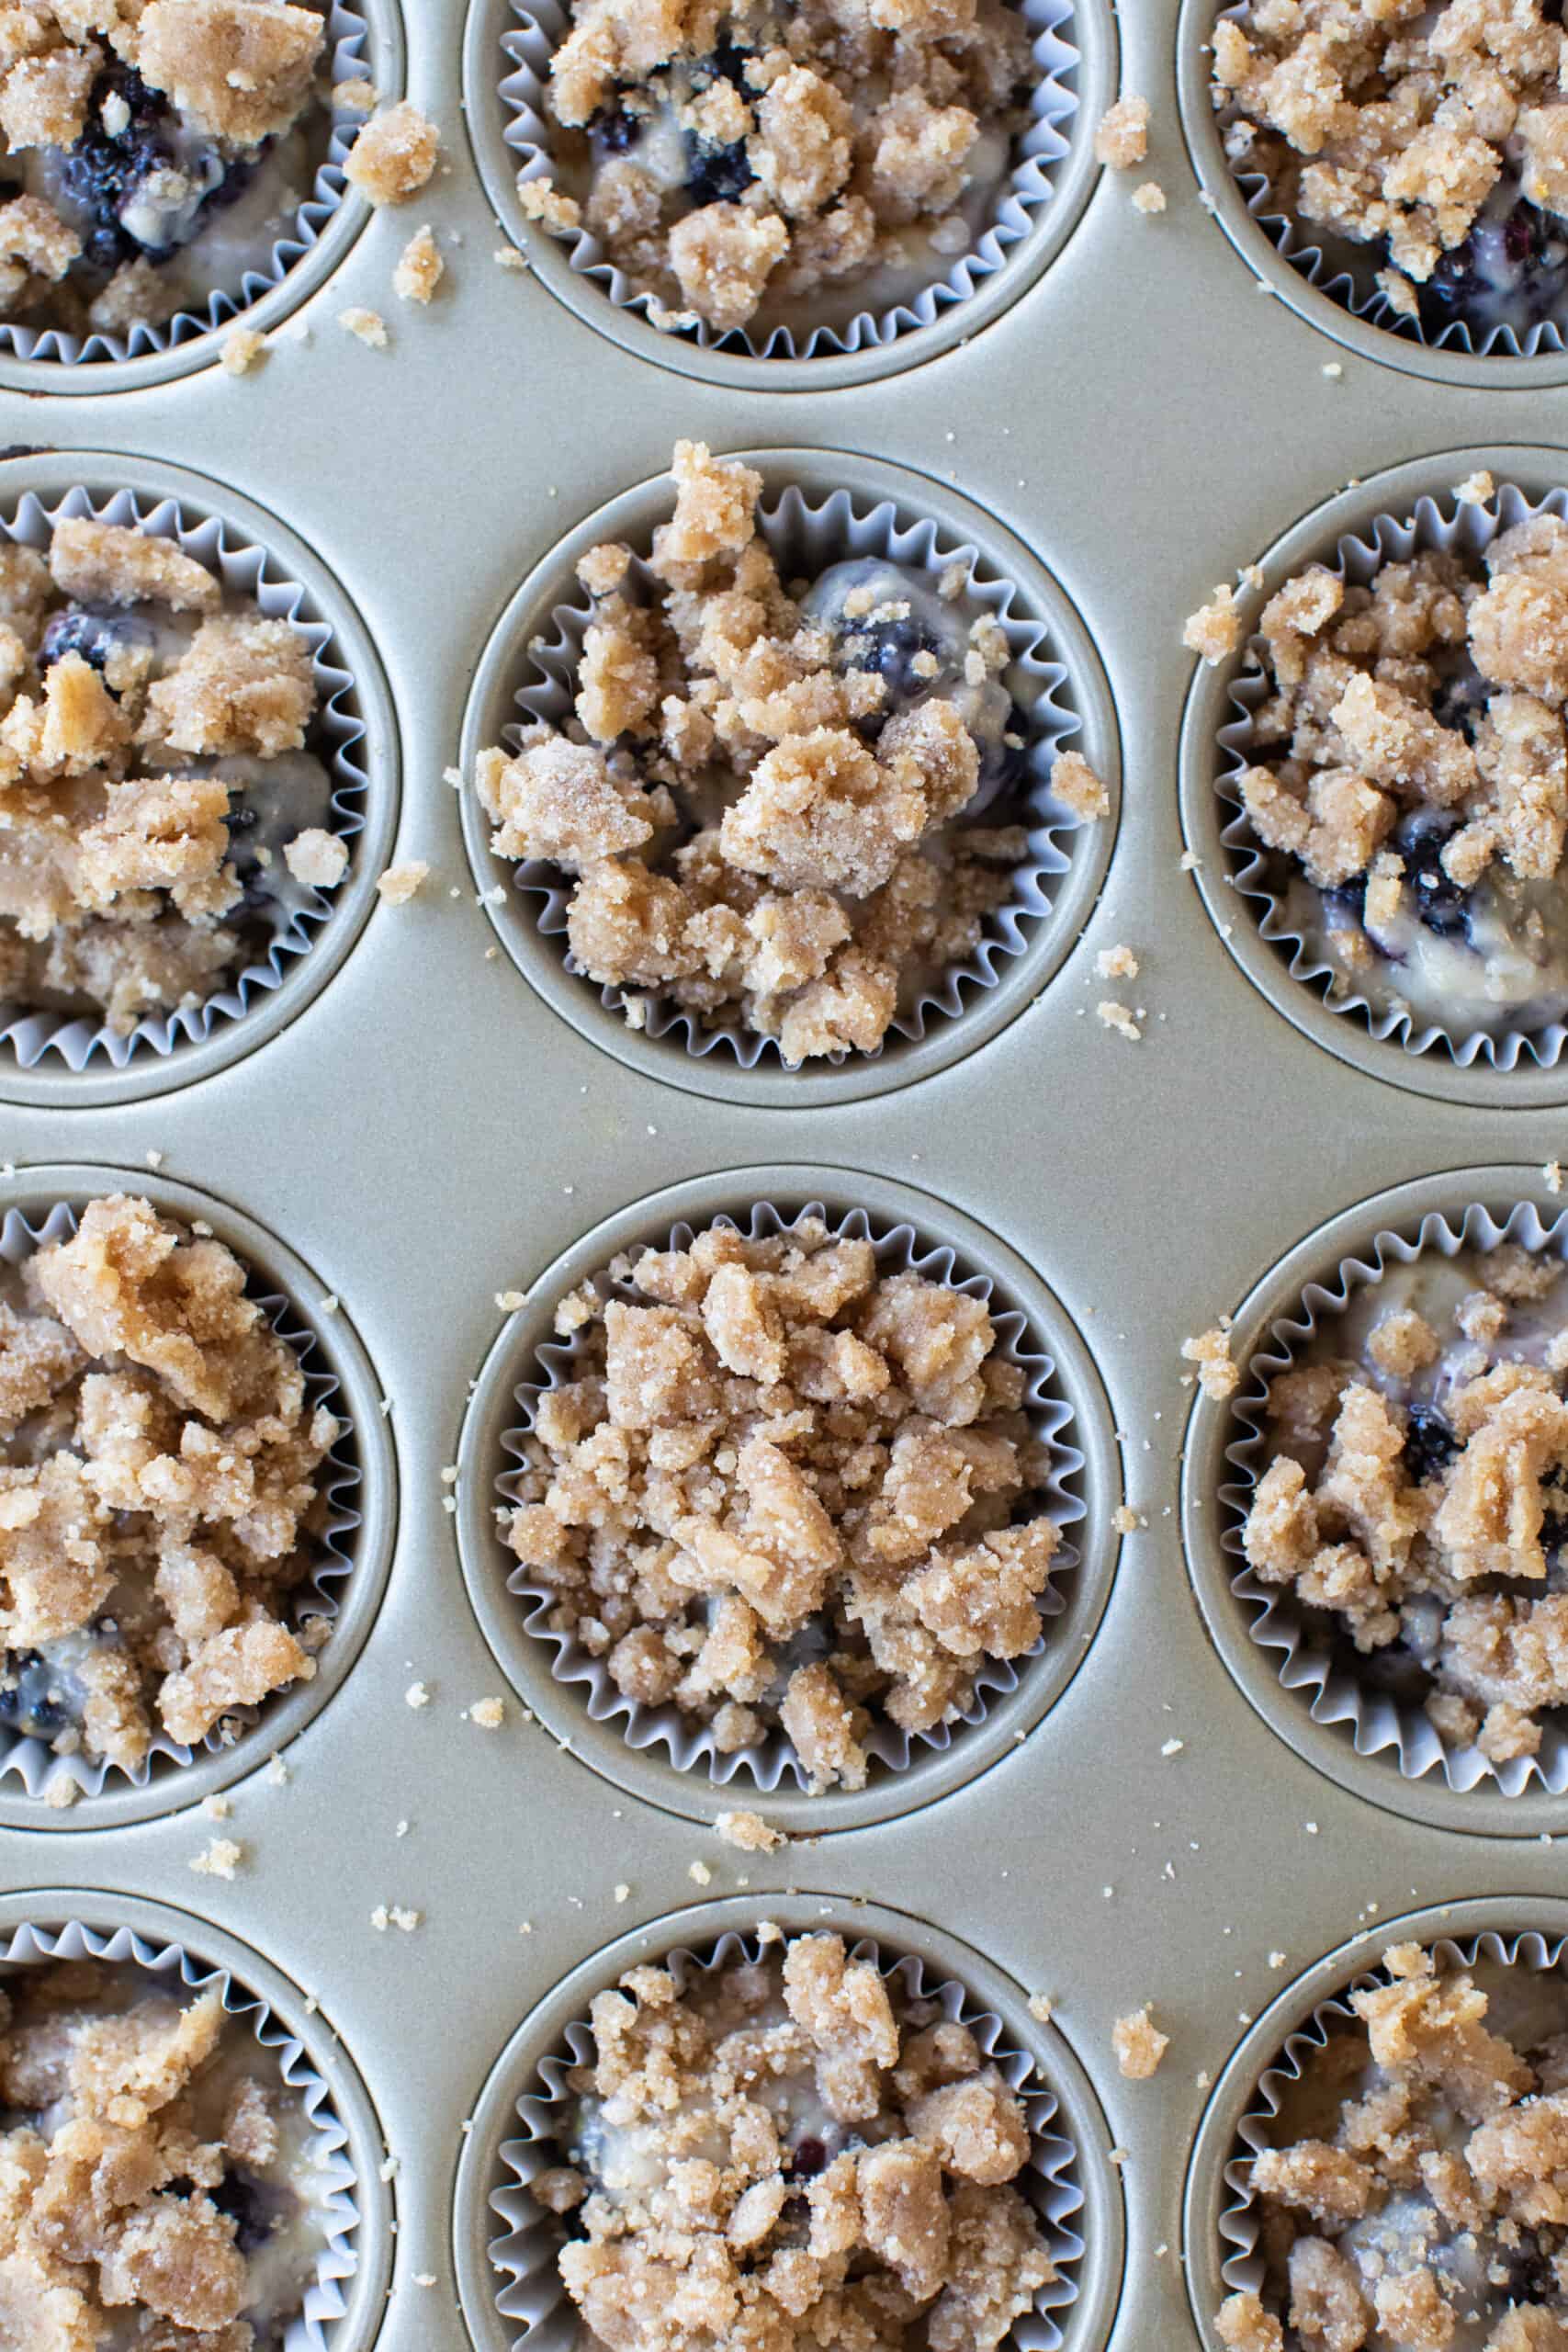 Crumble topping on muffins.